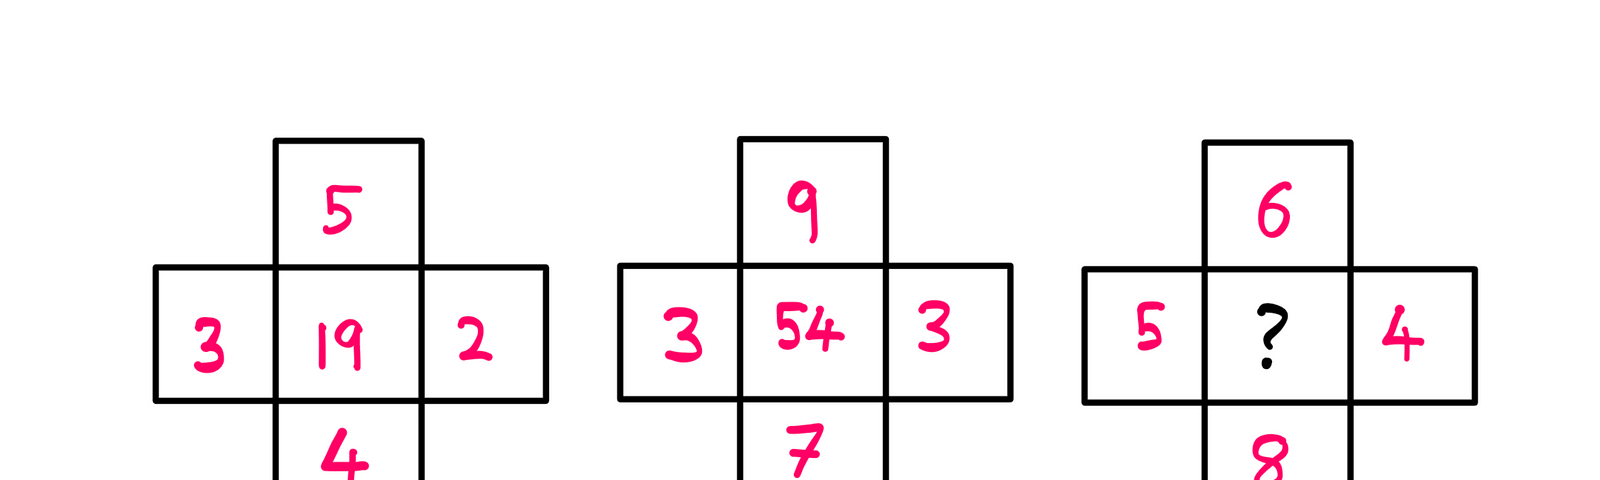 The sixth grade math puzzle — First example: Number at the top: 5, number at the left: 3, number at the right: 2, number at the bottom: 4, number at the center: 19. Second example: Number at the top: 9, number at the left: 3, number at the right: 3, number at the bottom: 7, number at the center: 54. Puzzle: Number at the top: 6, number at the left: 5, number at the right: 4, number at the bottom: 8, number at the center: ?